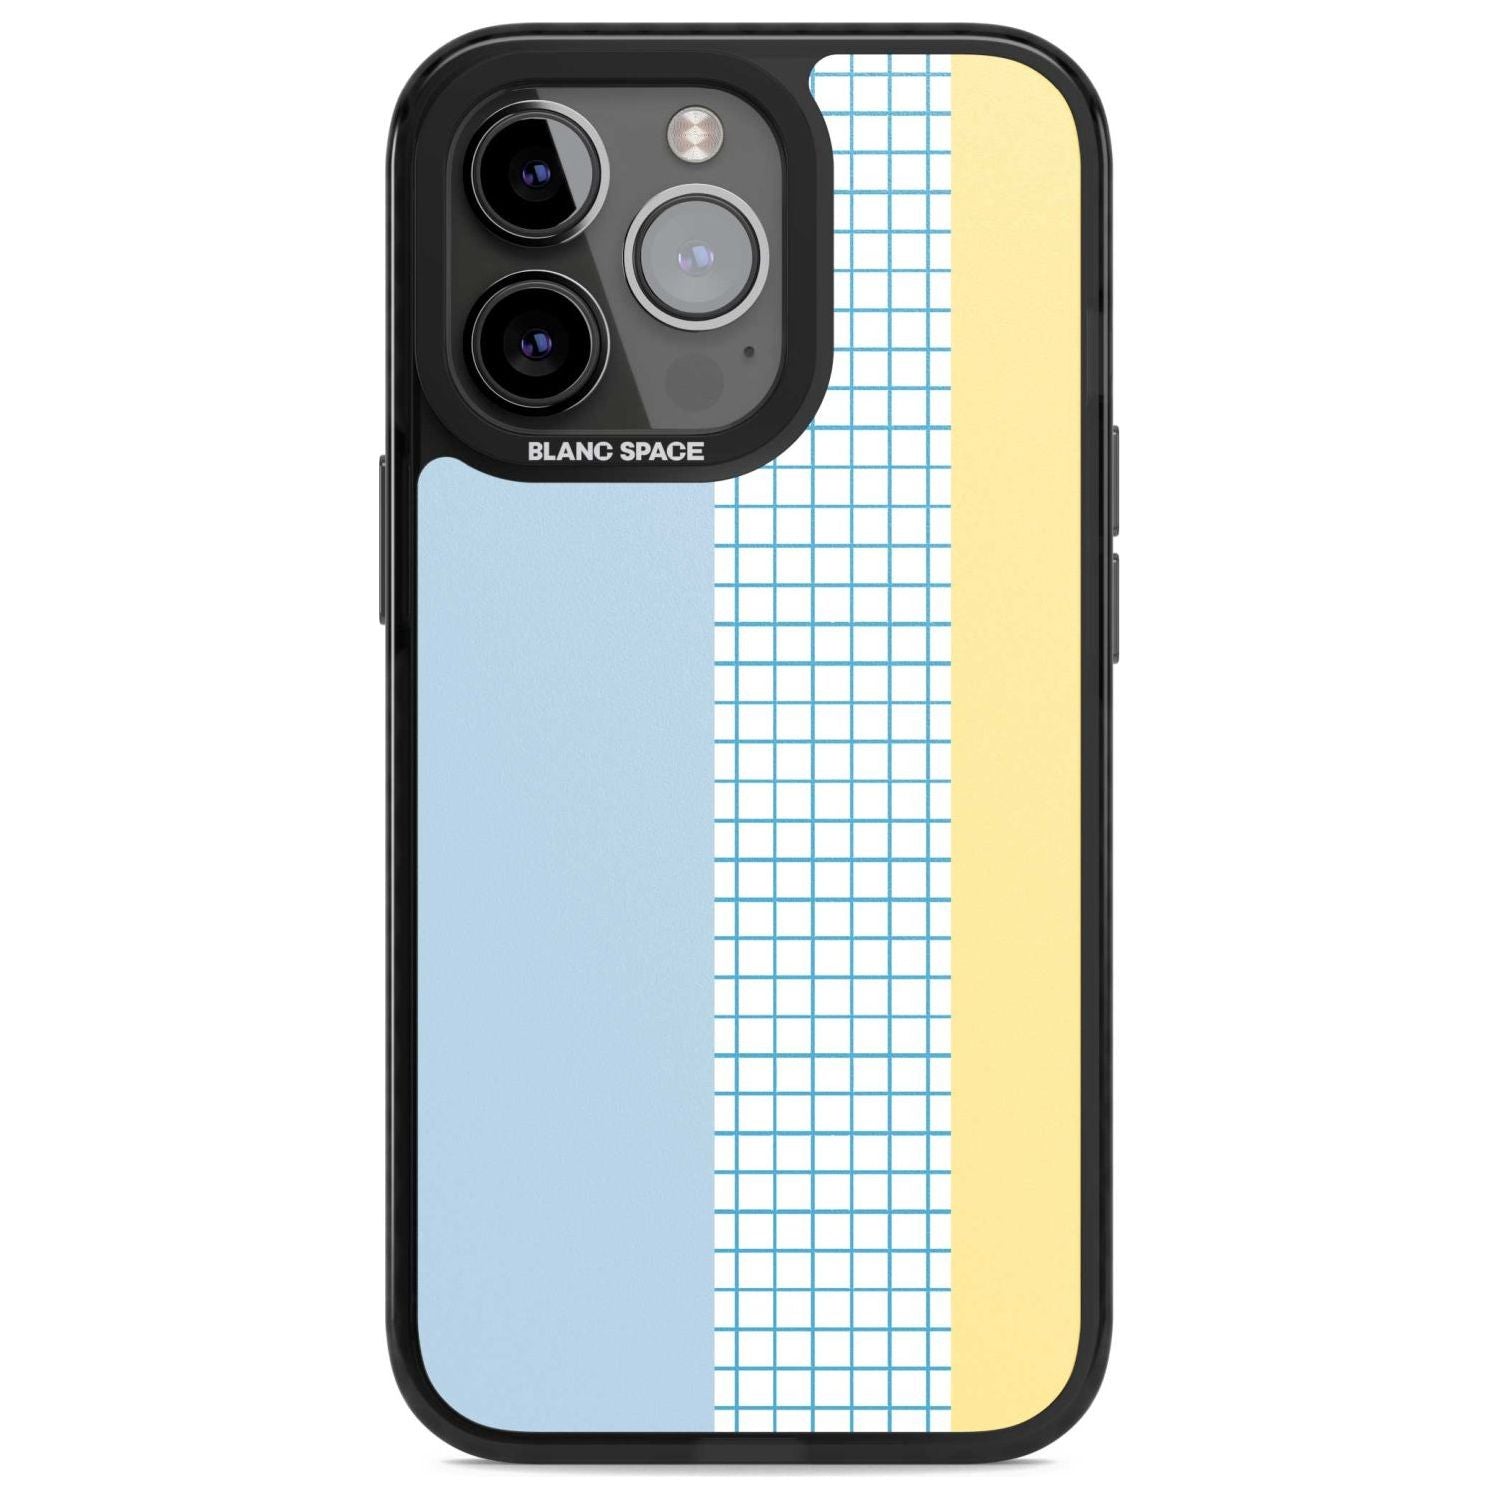 Abstract Grid Blue & Yellow Phone Case iPhone 15 Pro Max / Magsafe Black Impact Case,iPhone 15 Pro / Magsafe Black Impact Case,iPhone 14 Pro Max / Magsafe Black Impact Case,iPhone 14 Pro / Magsafe Black Impact Case,iPhone 13 Pro / Magsafe Black Impact Case Blanc Space